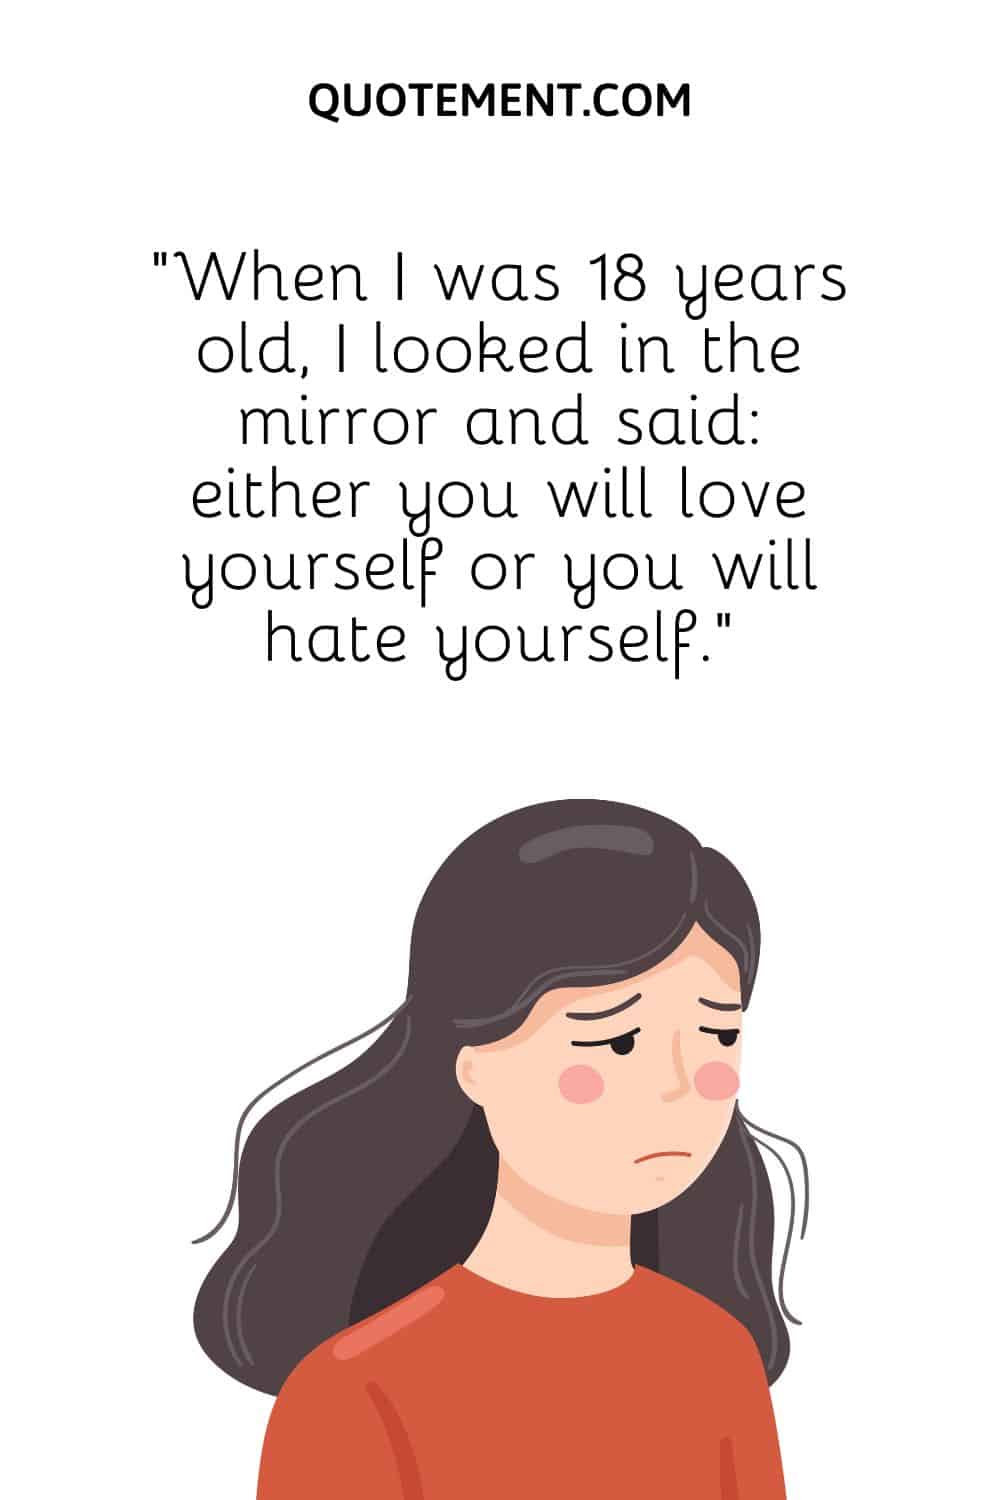 “When I was 18 years old, I looked in the mirror and said either you will love yourself or you will hate yourself.”